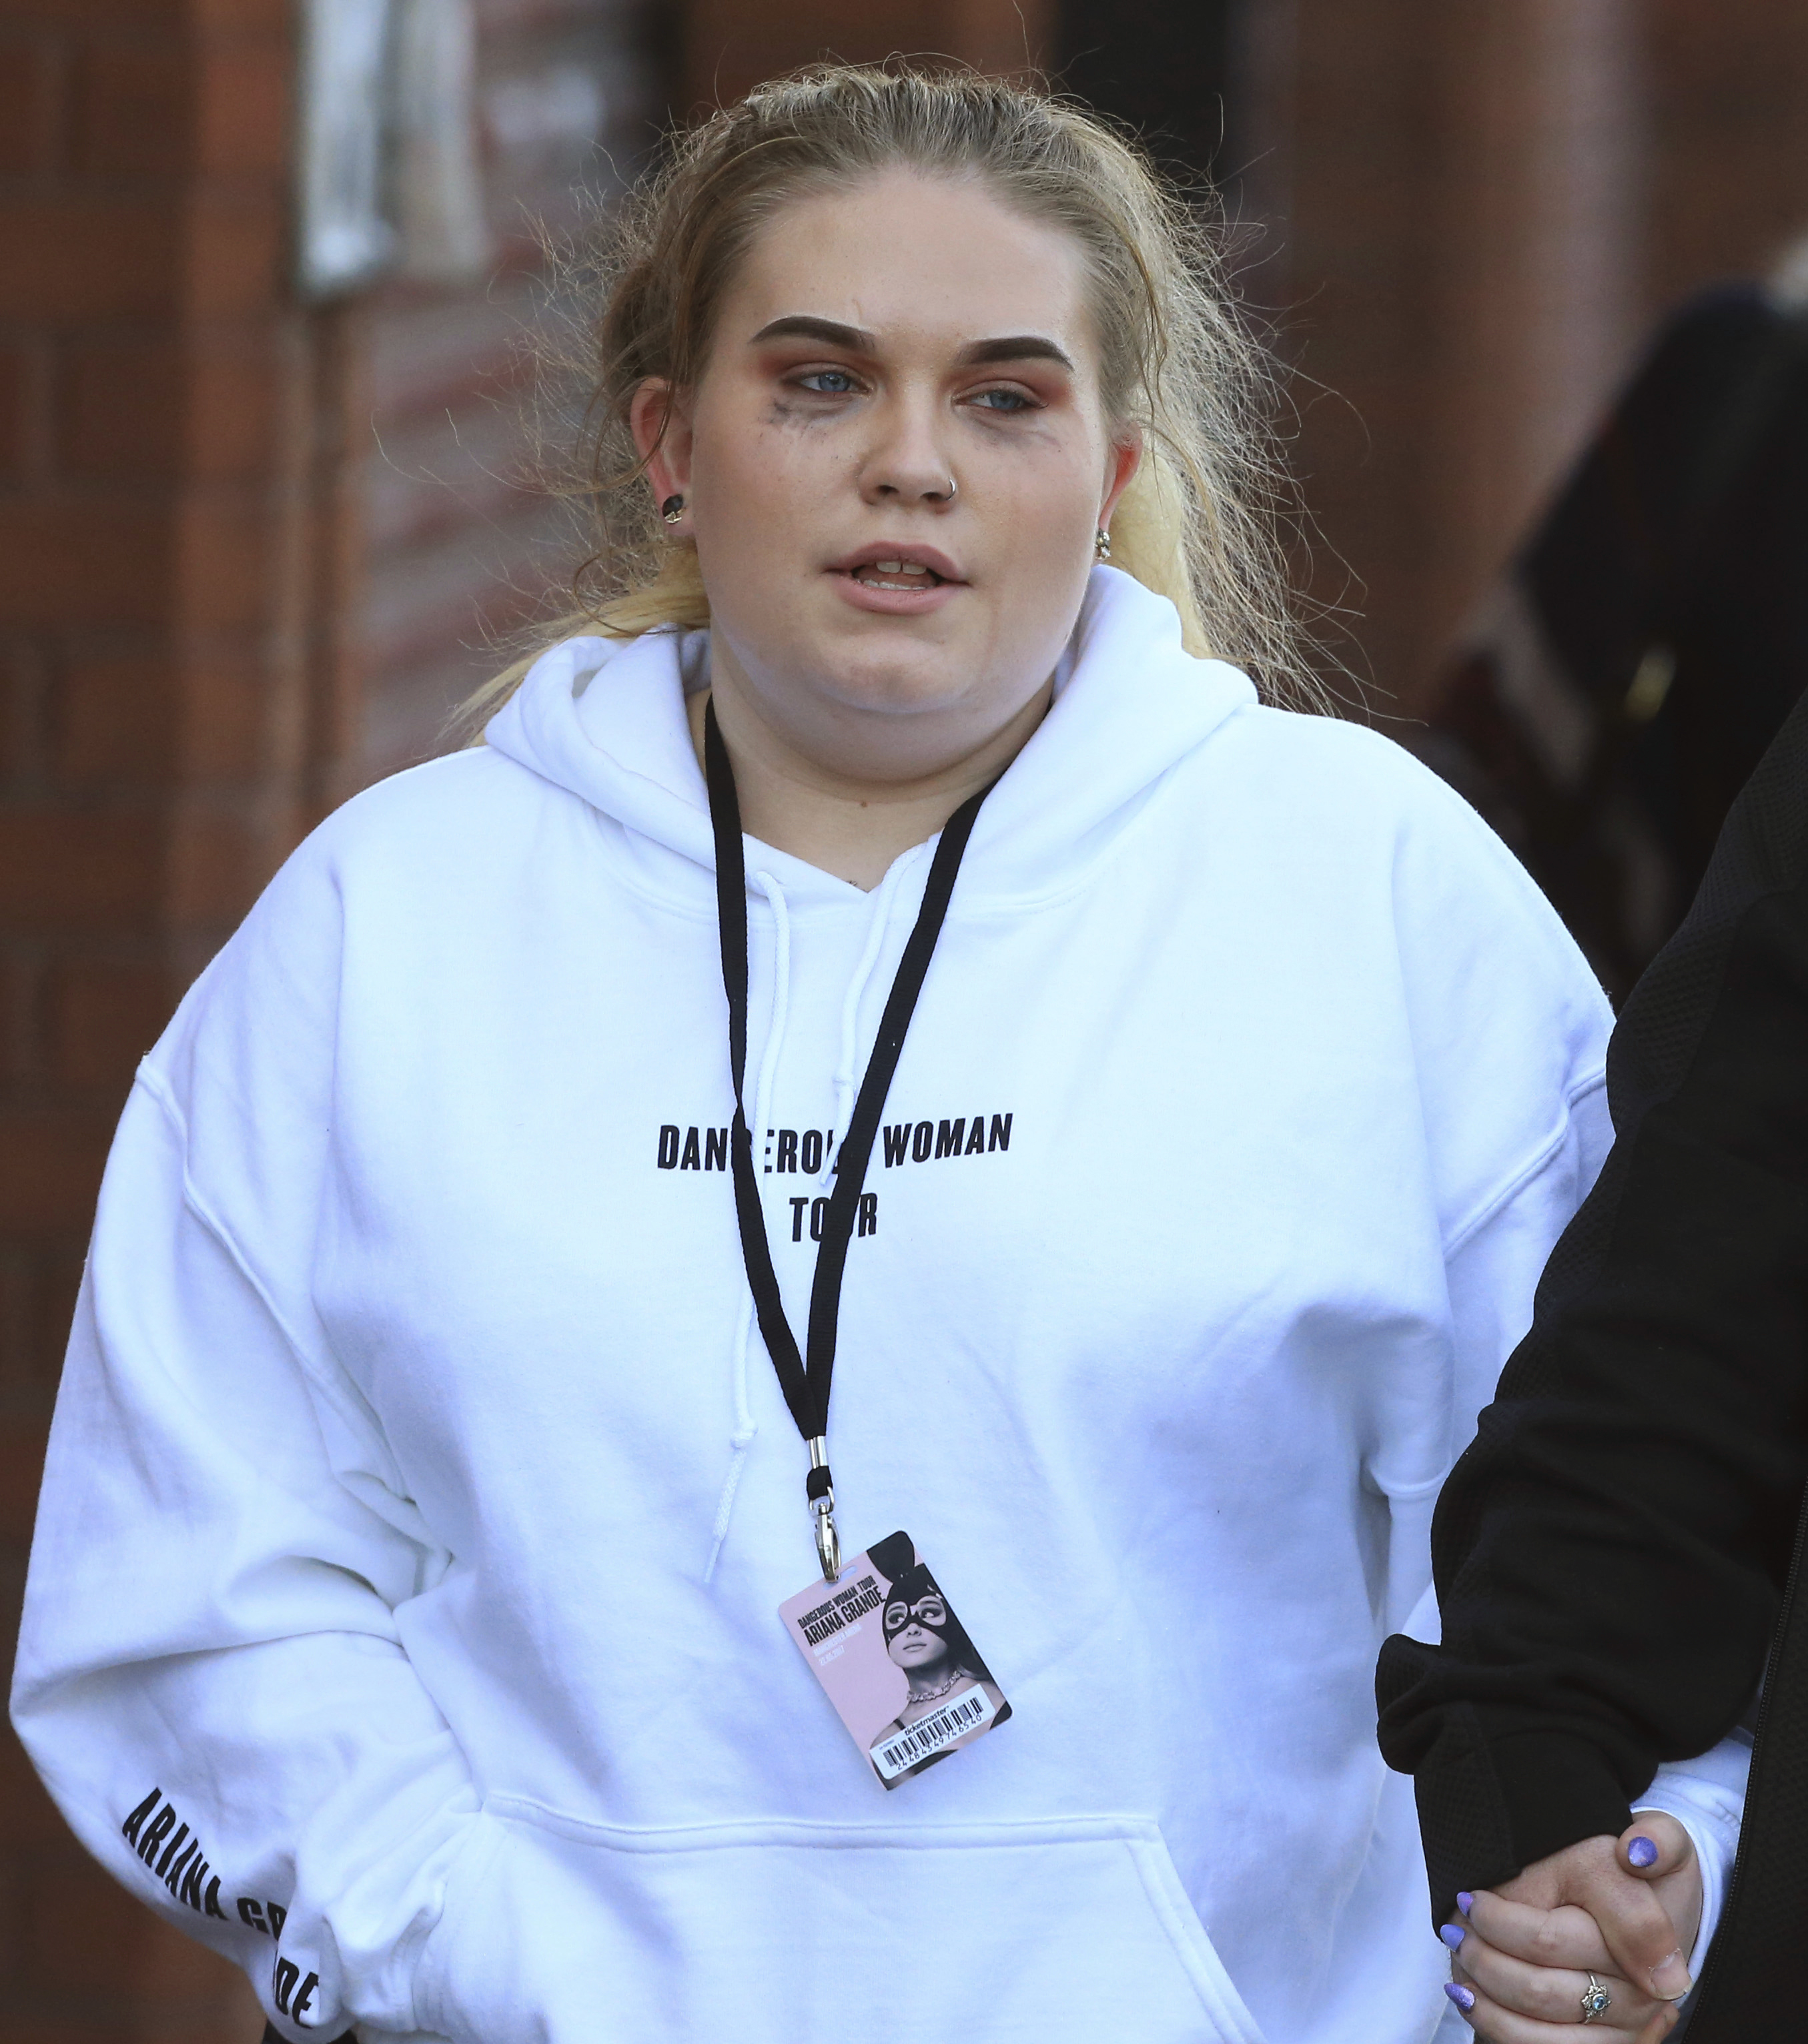 A fan leaves the Park Inn hotel in central Manchester, Britain, Tuesday, May 23 2017.  An apparent suicide bomber set off an improvised explosive device that killed over a dozen people at the end of an Ariana Grande concert on Monday, Manchester police said Tuesday.  (AP Photo/Rui Vieira)